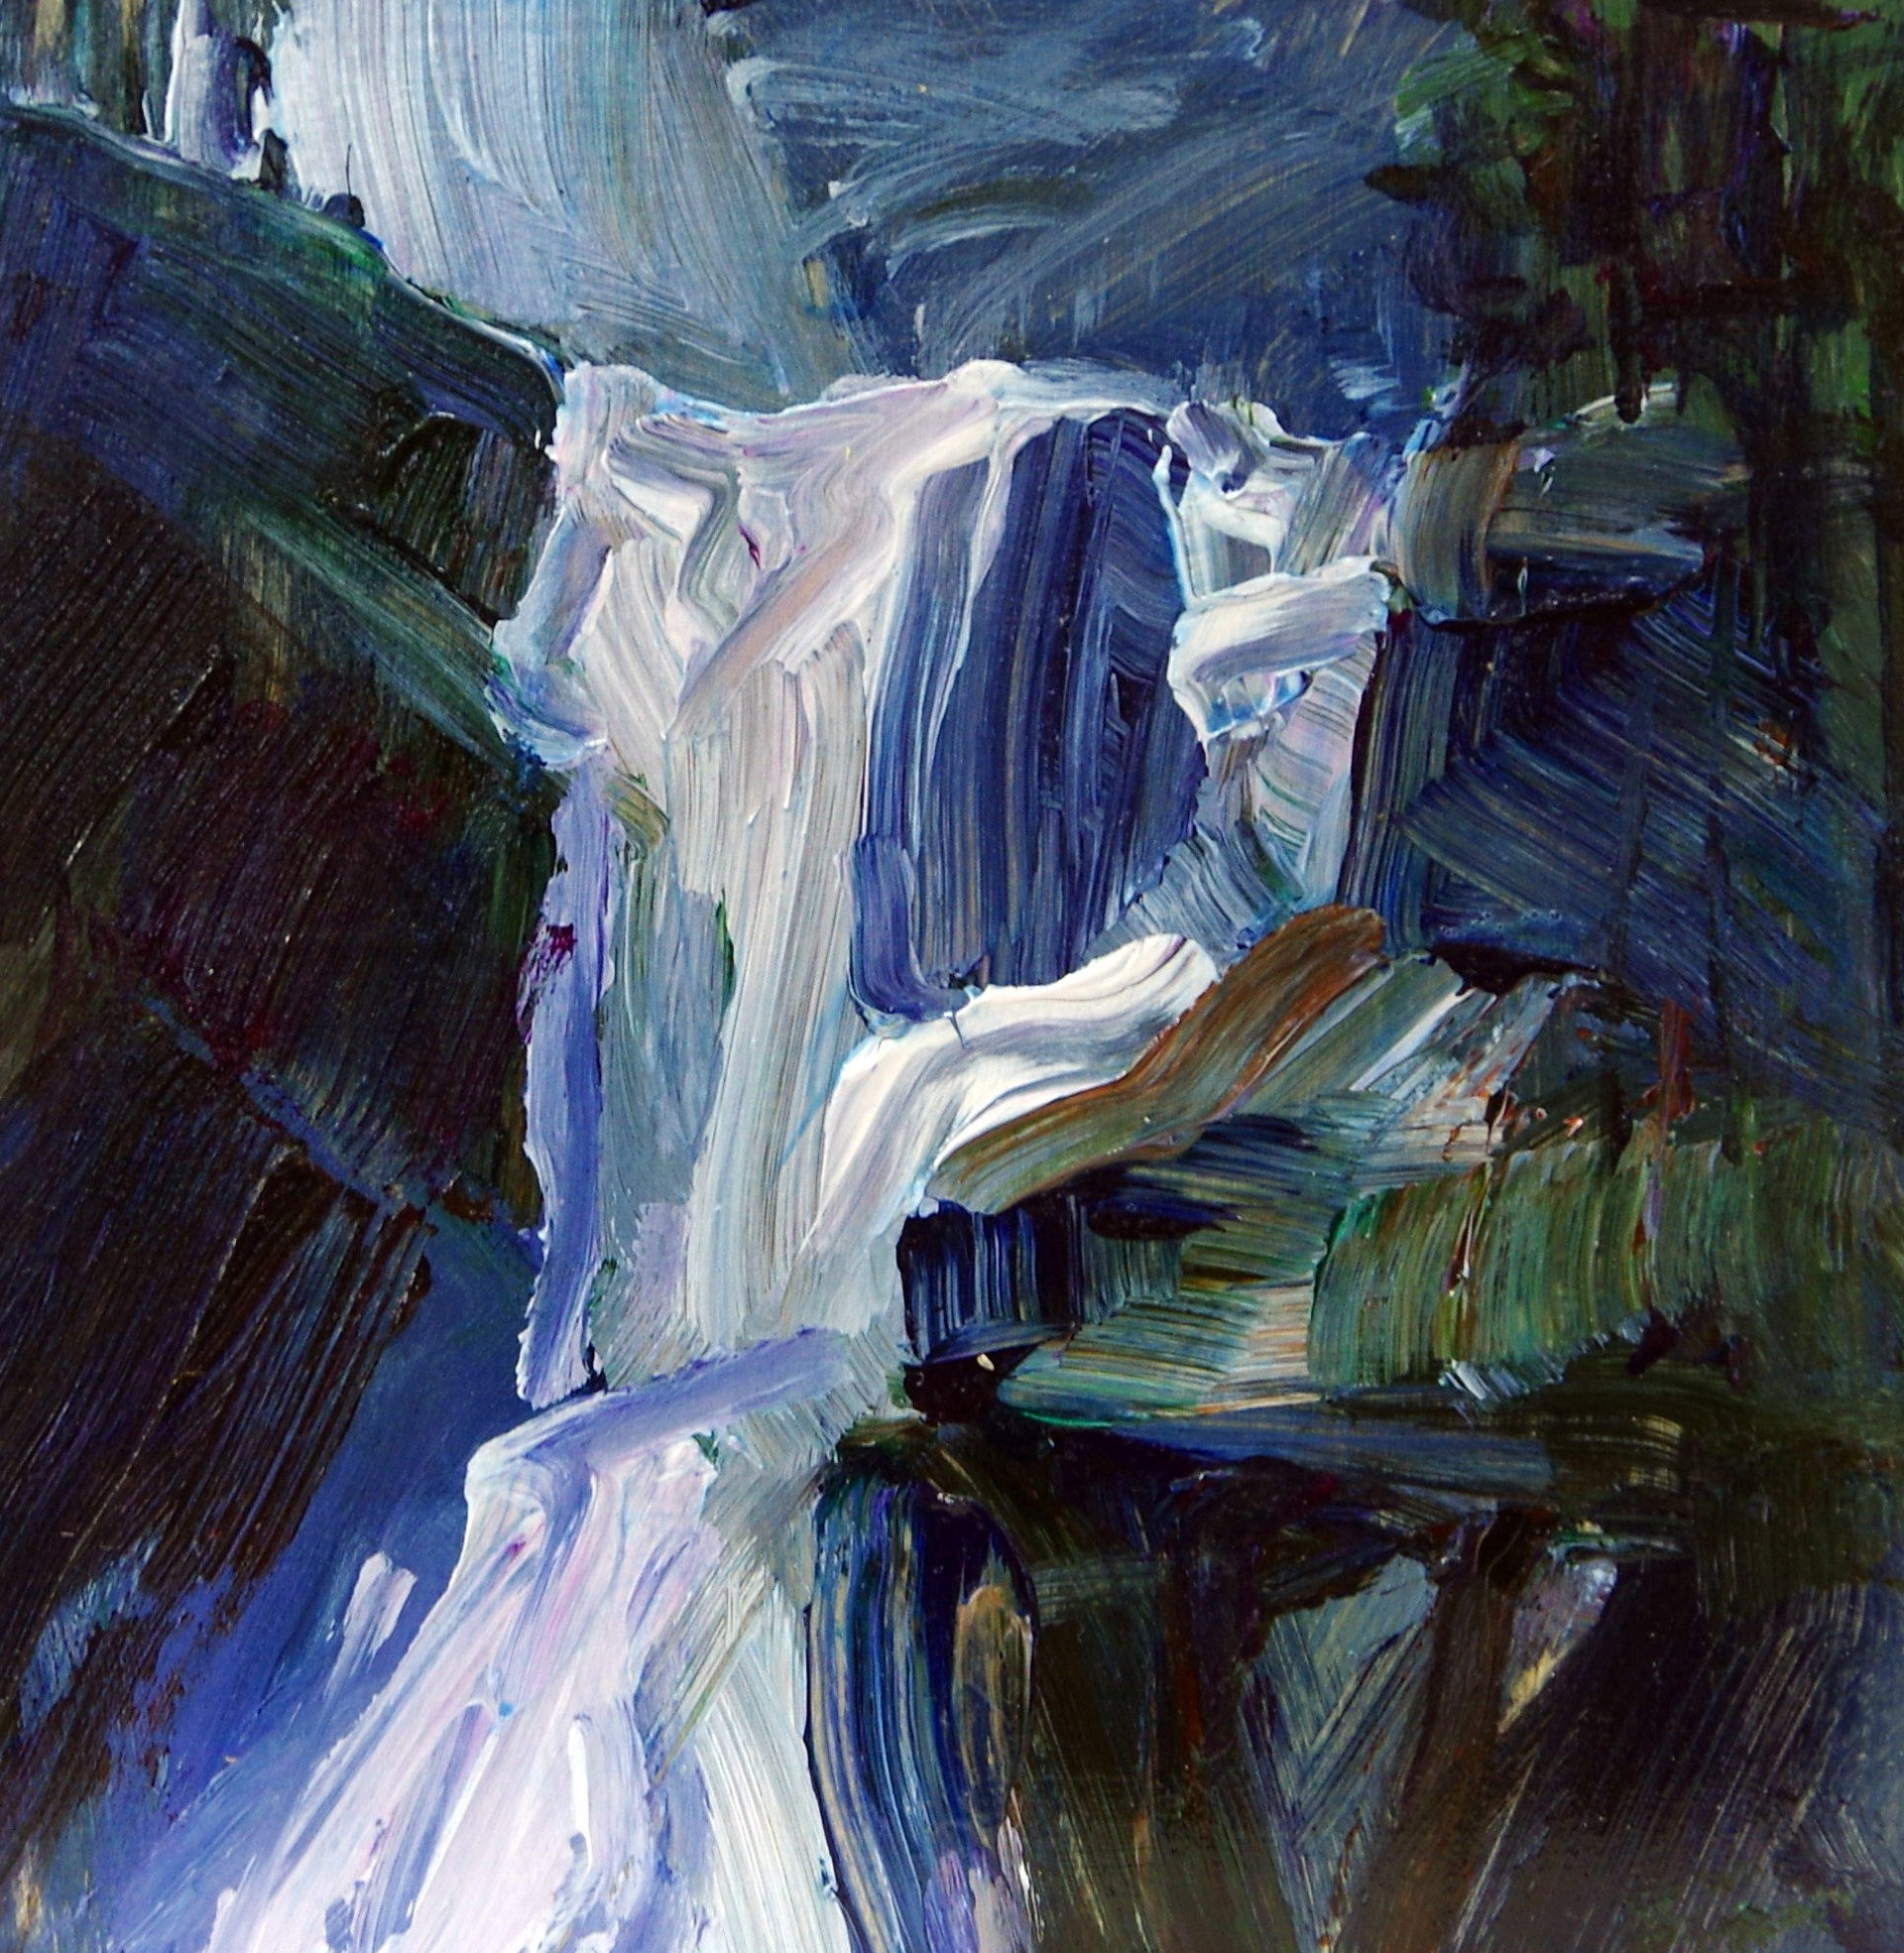 Shannon Falls 2 by SUSIE CIPOLLA